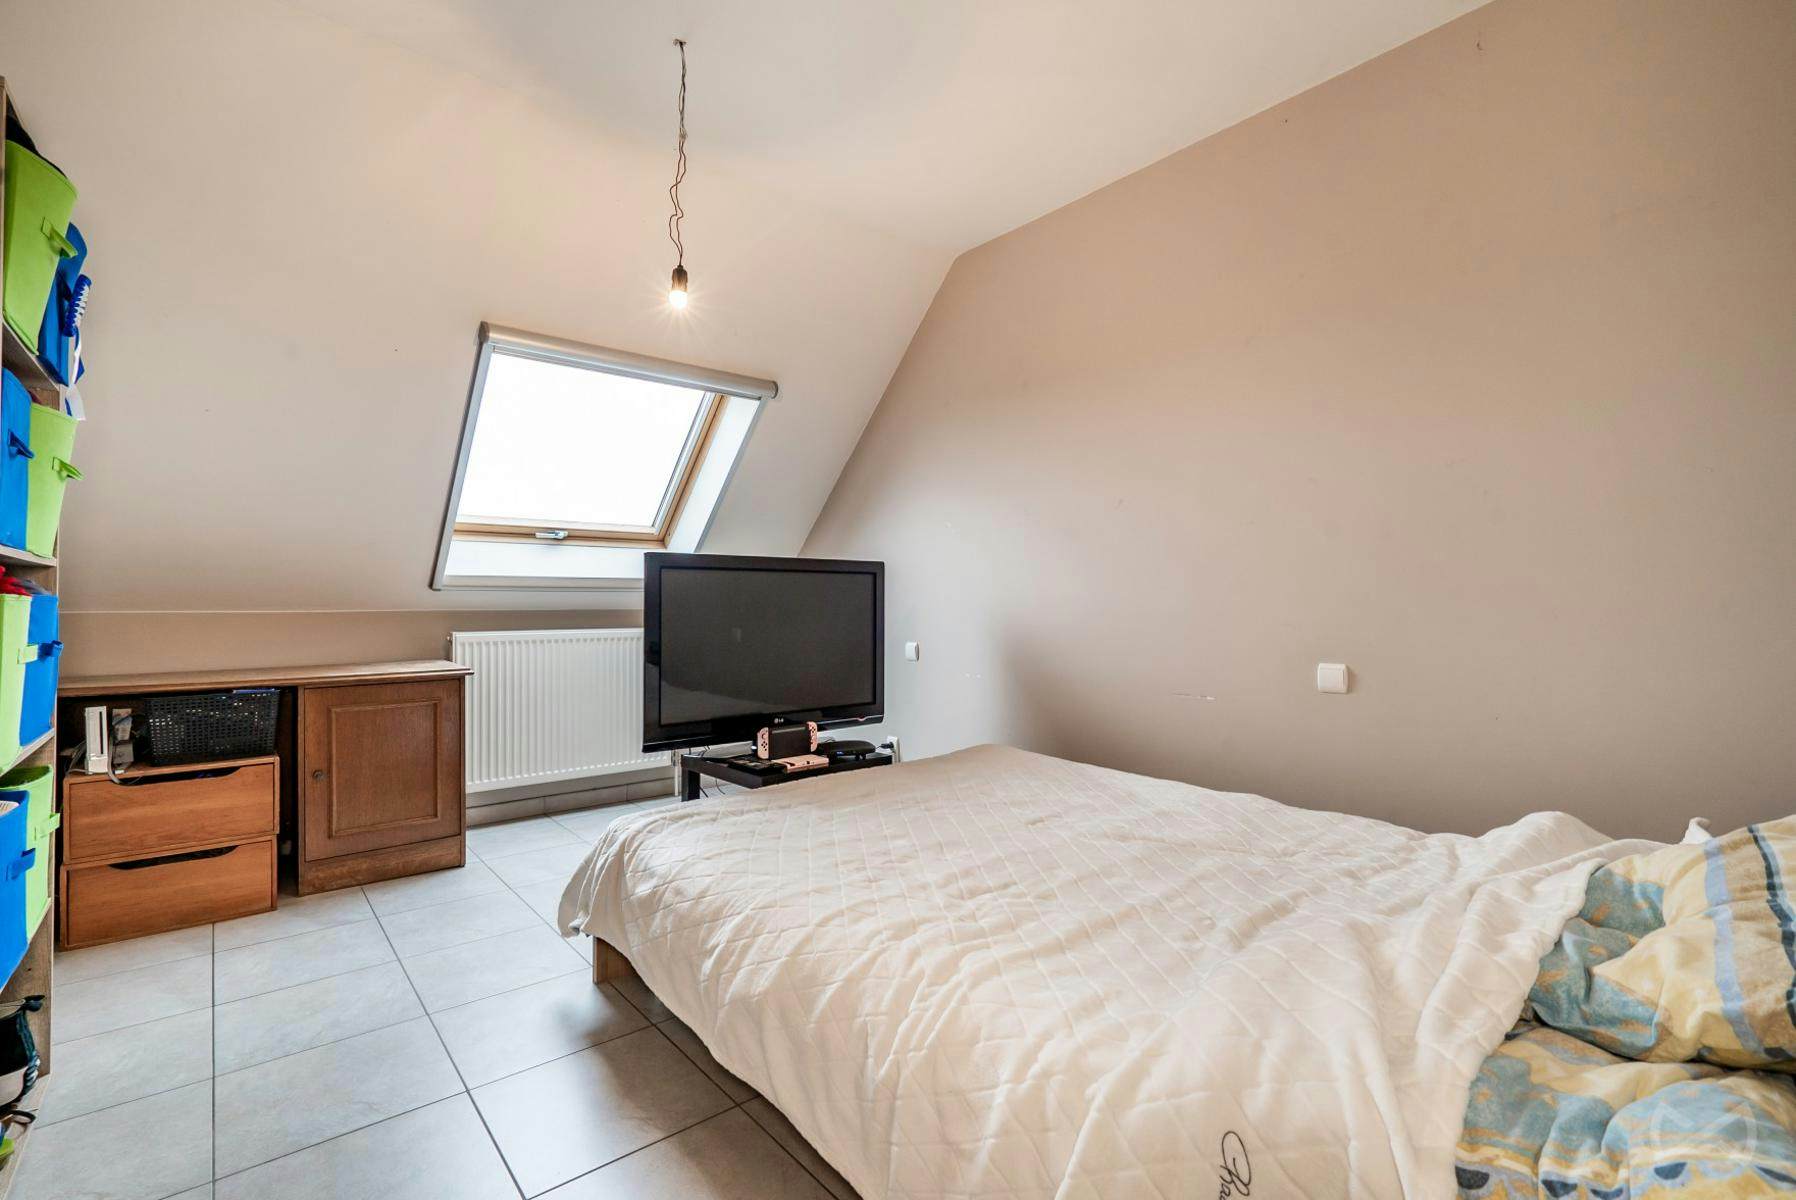 Picture 3 of 4 for Flat with four bedrooms in Leuze-en-hainaut